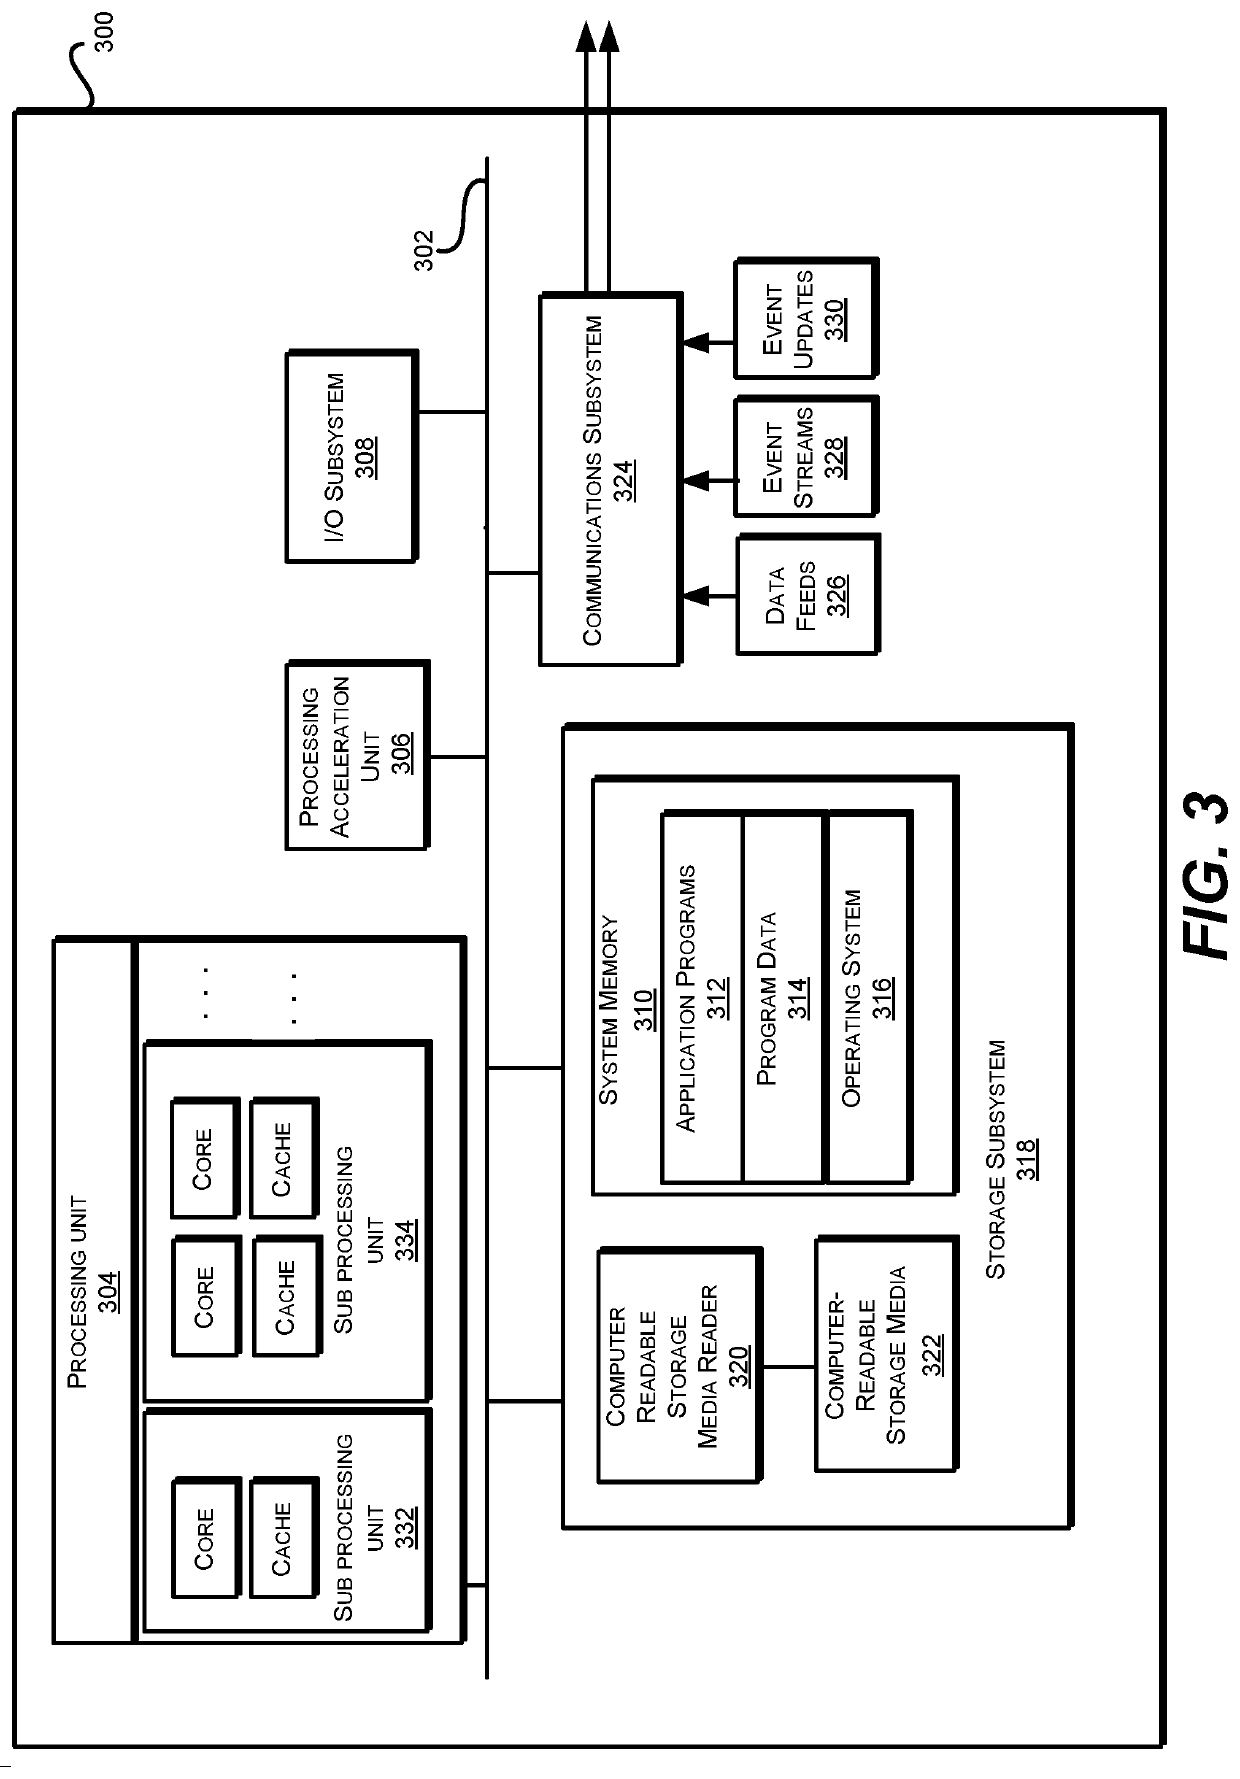 Instant notification of load balance and resource scheduling based on resource capacities and event recognition